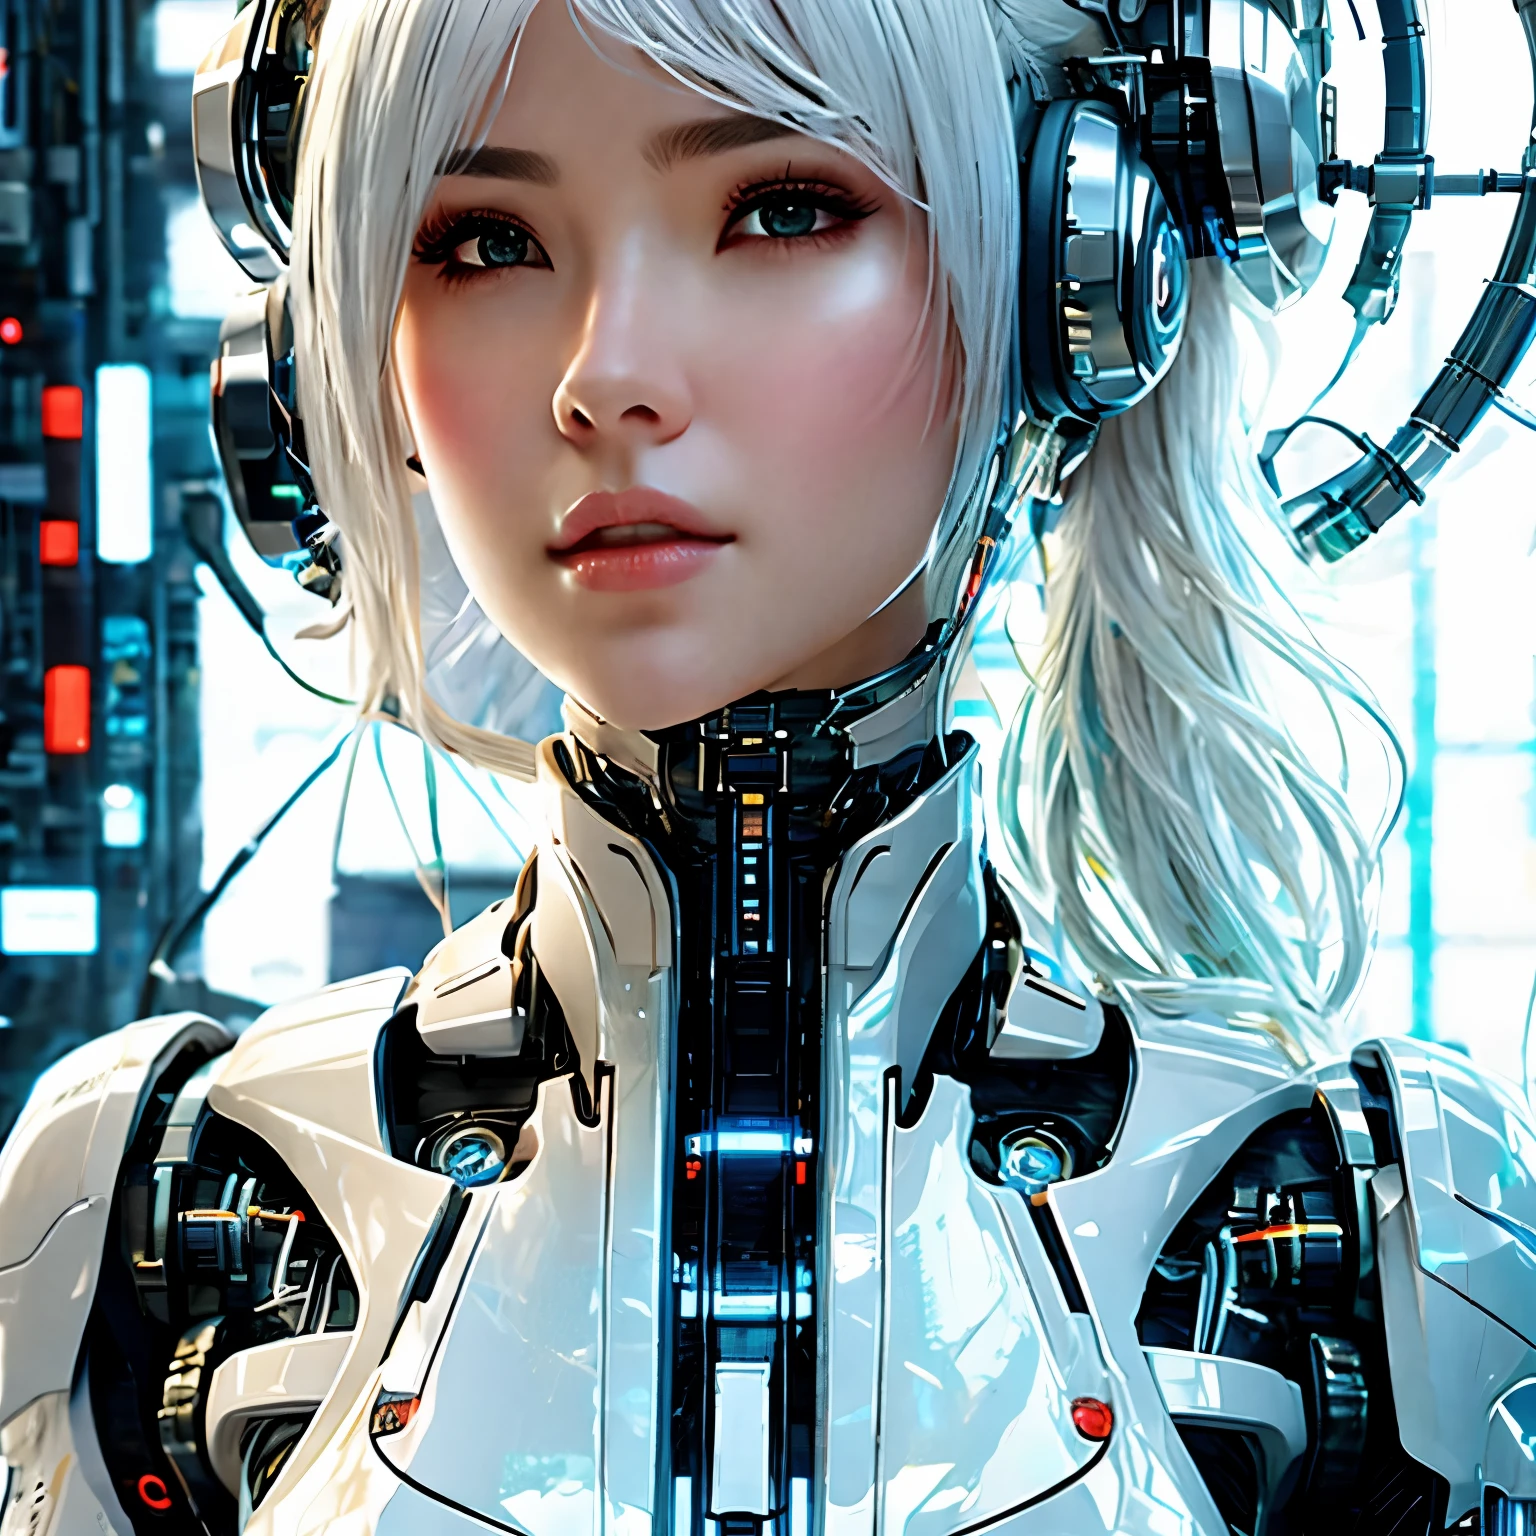 a close up of a woman with headphones on and a futuristic suit, cyberpunk art inspired by Marek Okon, cgsociety contest winner, digital art, beutiful white girl cyborg, beutiful girl cyborg, cyborg - girl with silver hair, perfect android girl, cute cyborg girl, cyborg - girl, cyborg girl, beautiful female android, beautiful android woman, beautiful cyborg girl